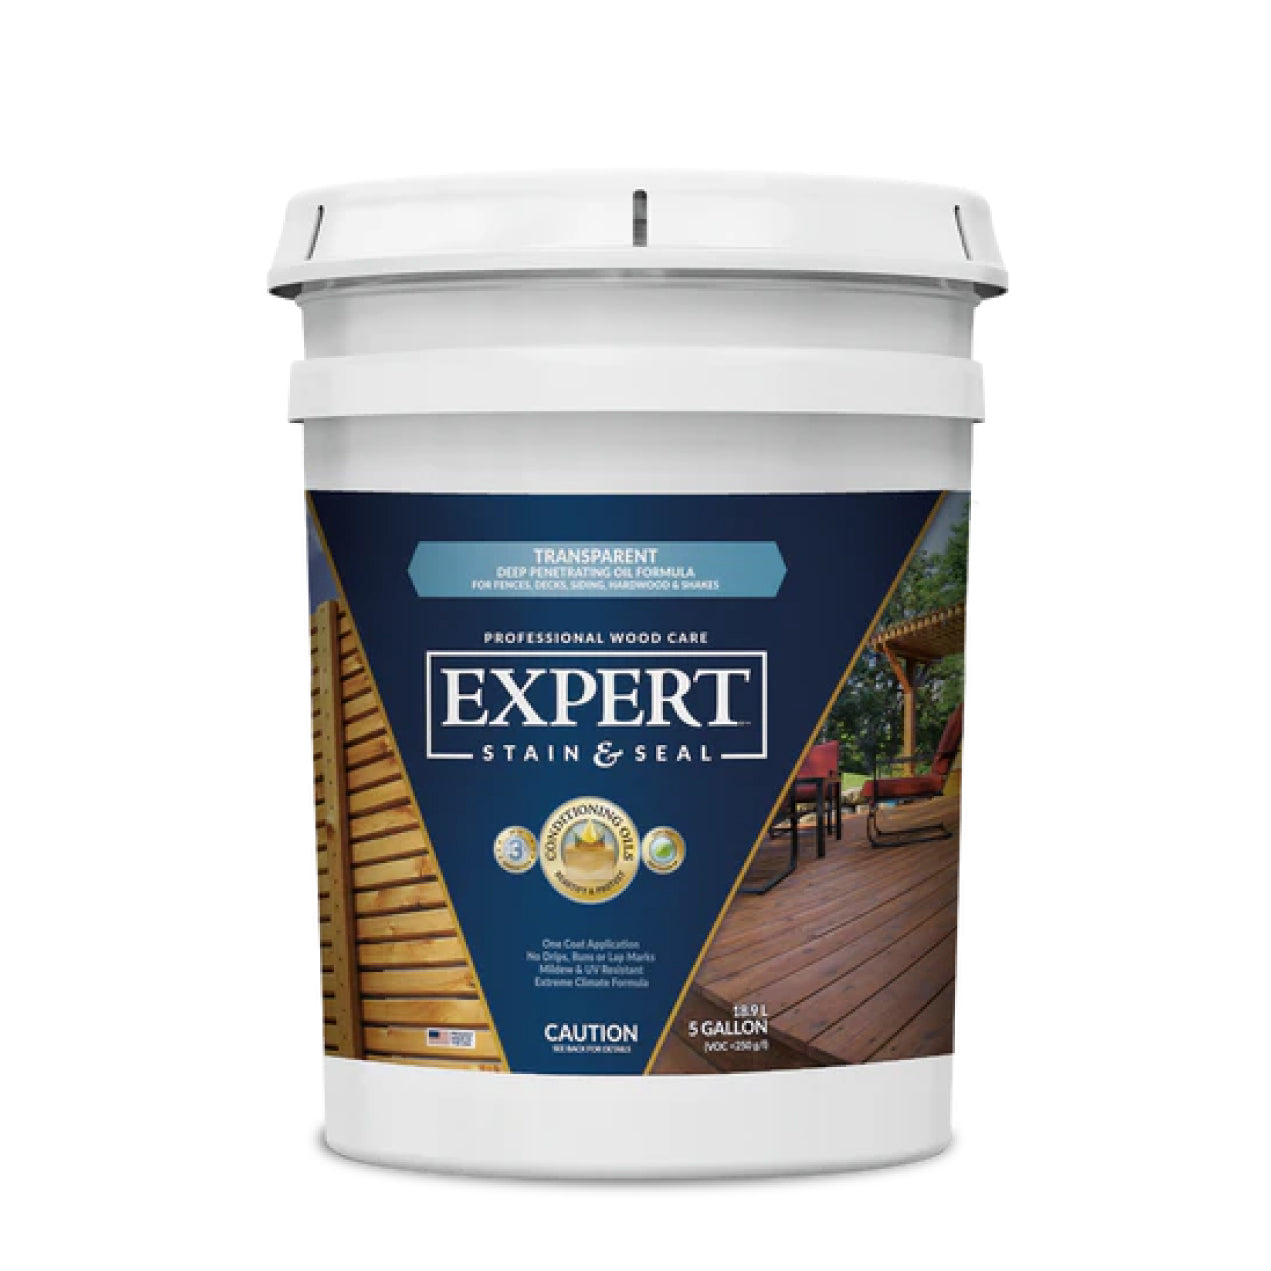 Expert Stain & Seal | Clear Fence, Deck, and Wood Stain & Sealer